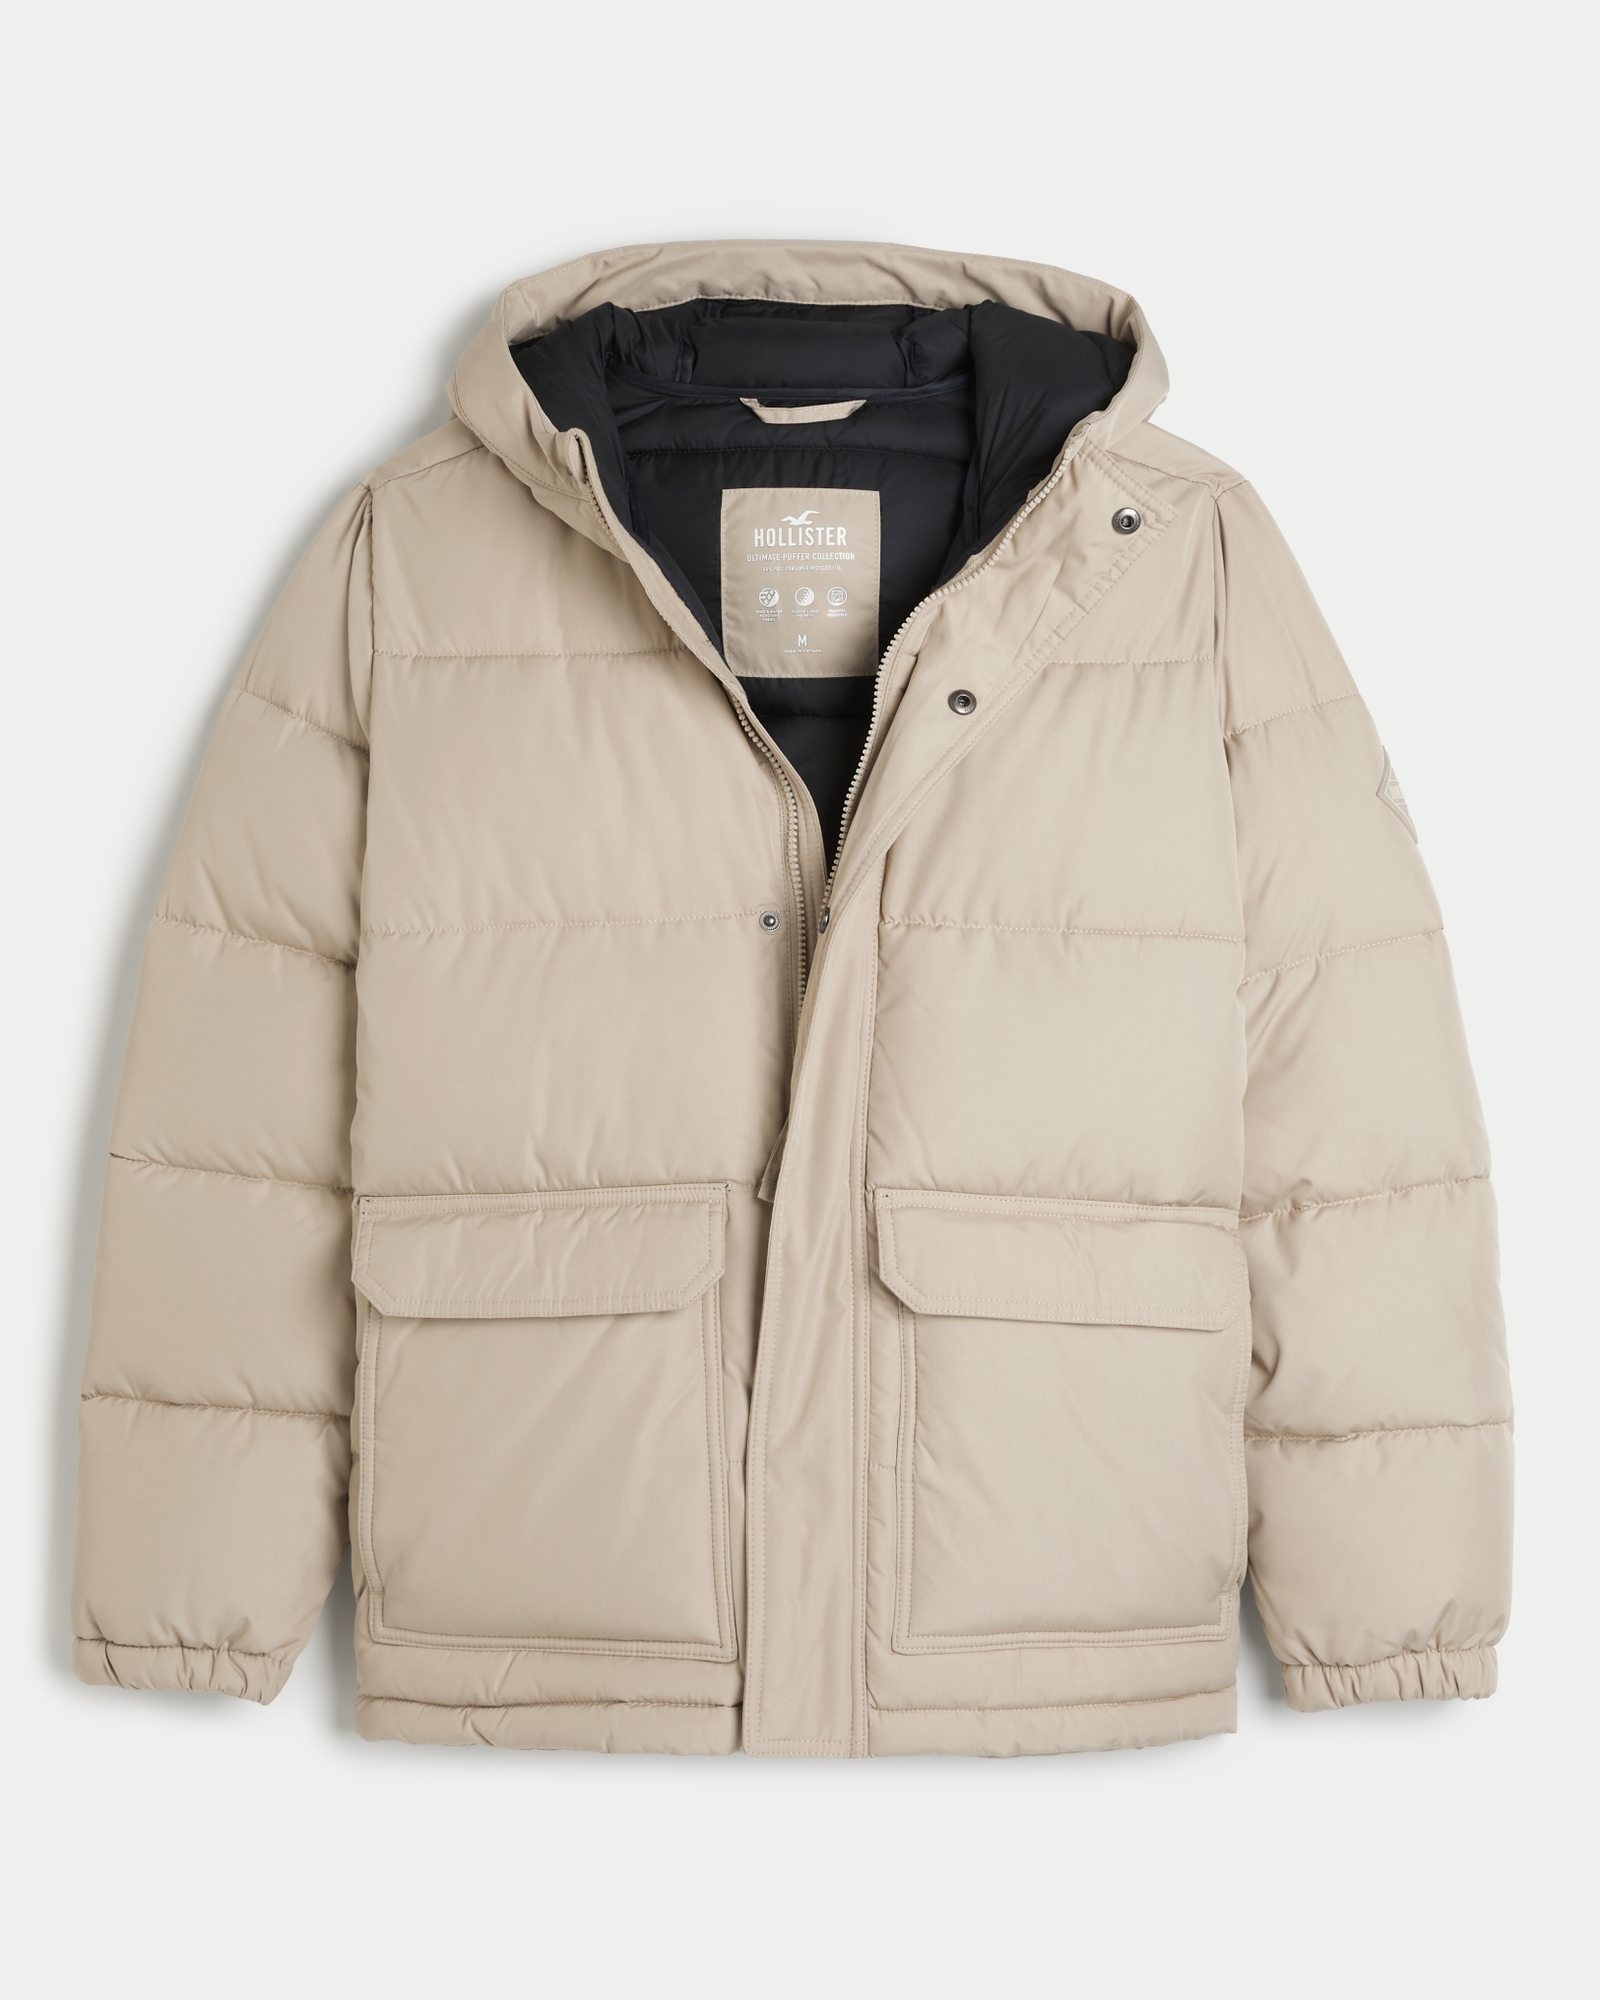 https://img.hollisterco.com/is/image/anf/KIC_332-3085-0021-410_prod1.jpg?policy=product-extra-large